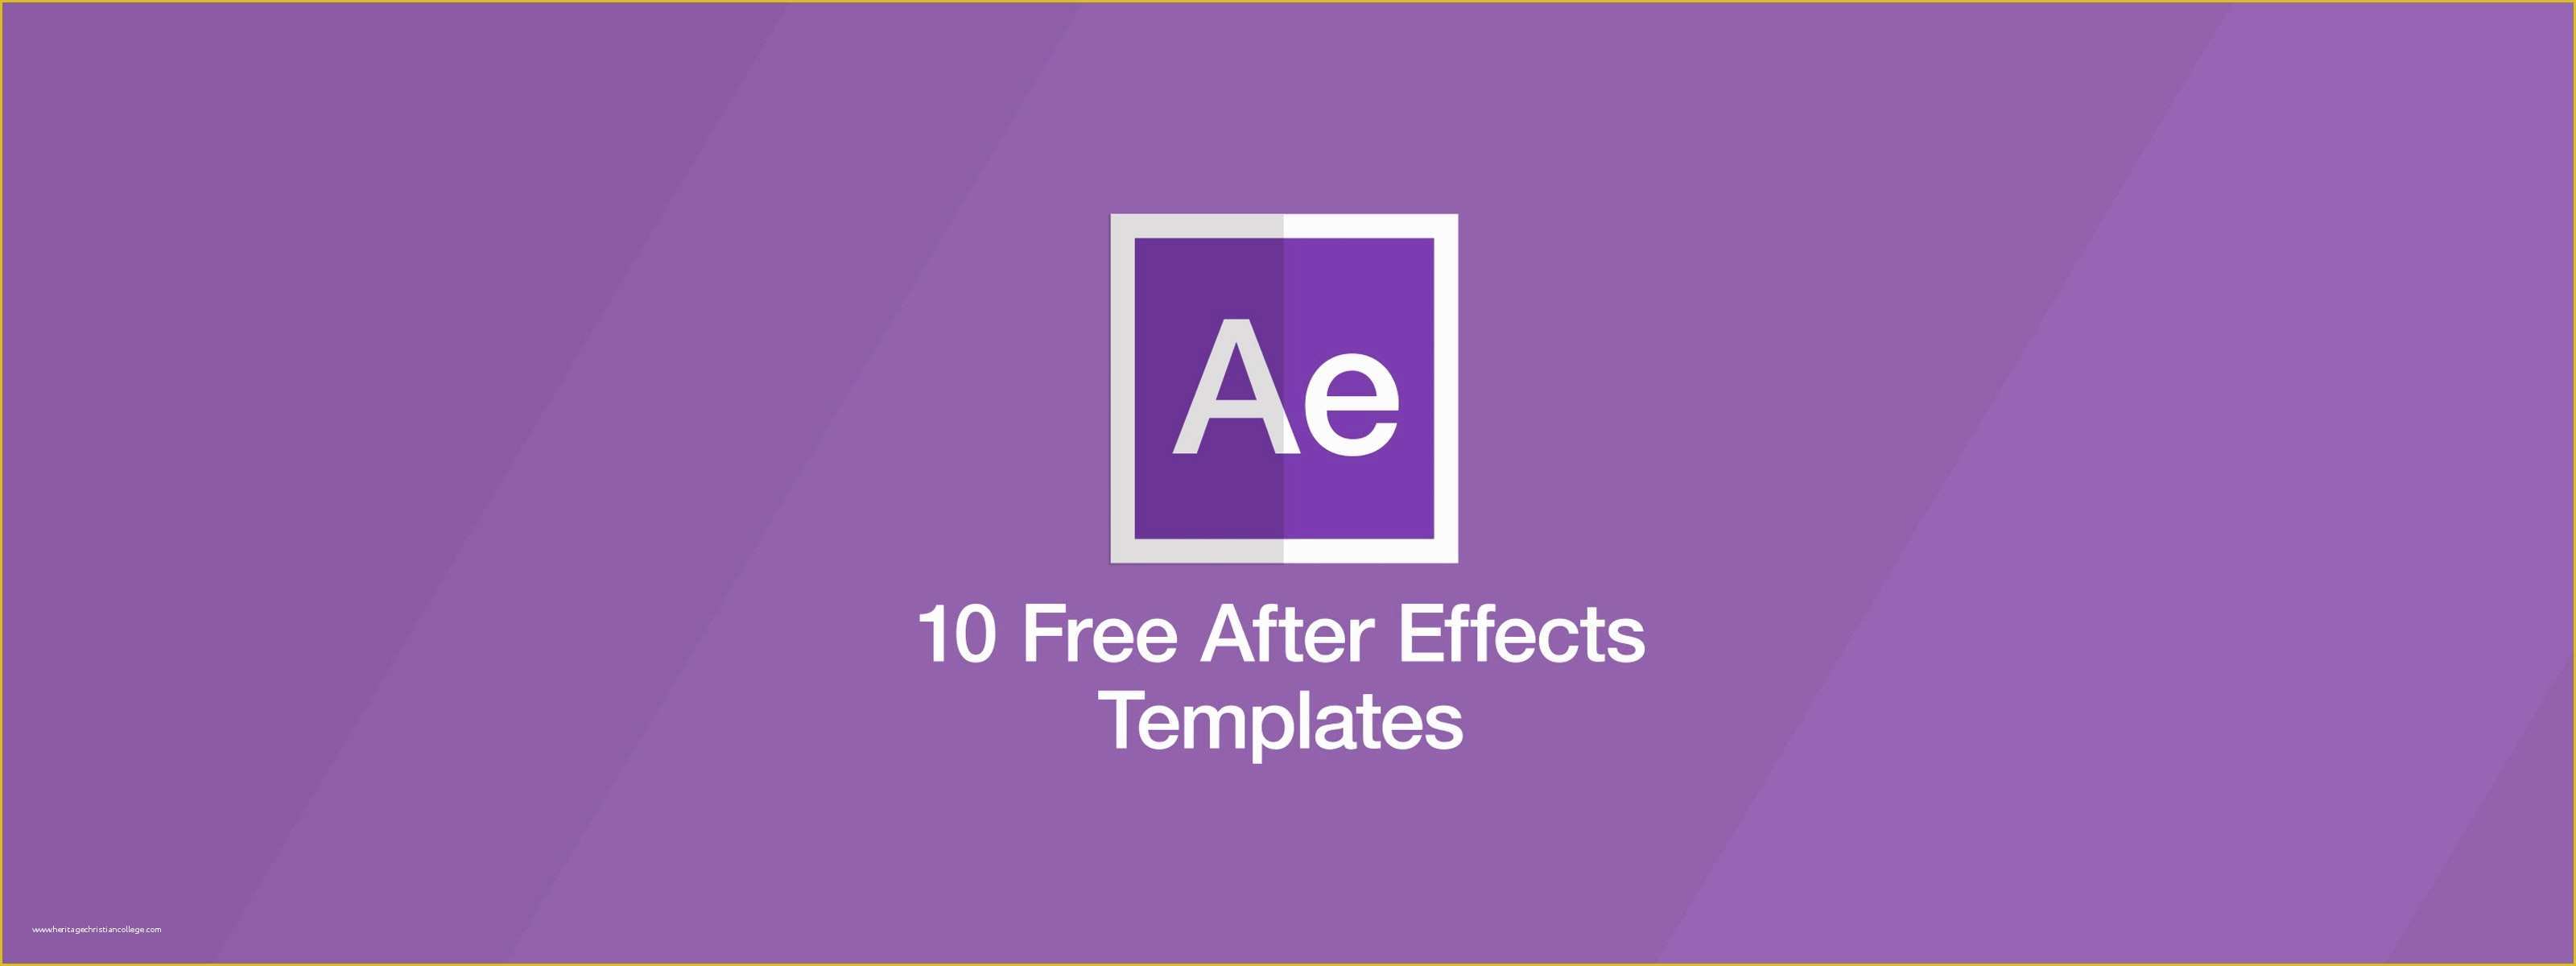 after-effects-movie-title-templates-free-download-of-10-free-after